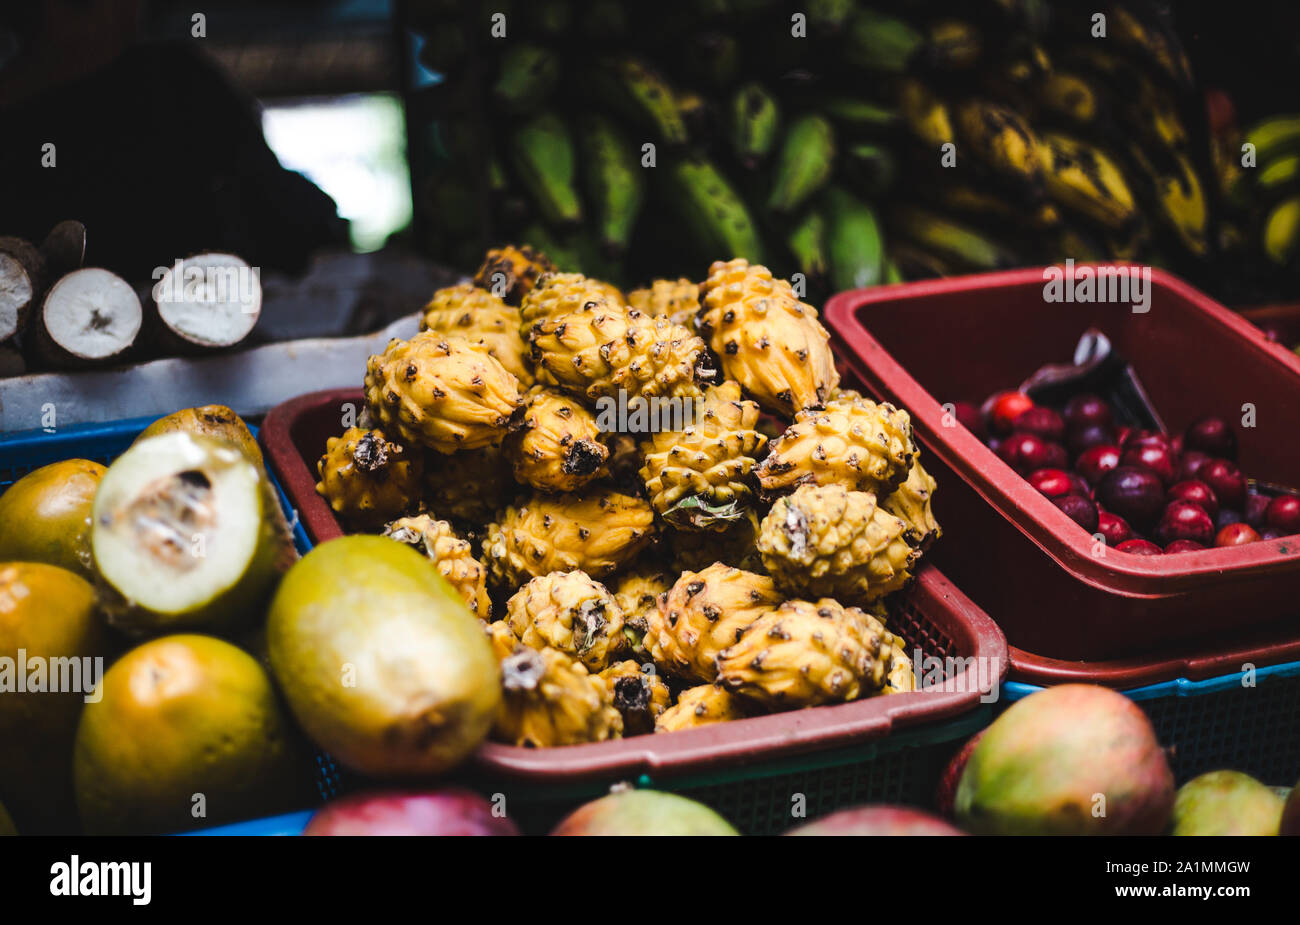 Baskets of exotic Colombian fruits on sale at a food market stall | Juicy box of pitaya dragon fruit surrounded by plantain, cherries, guanabana, lulo Stock Photo